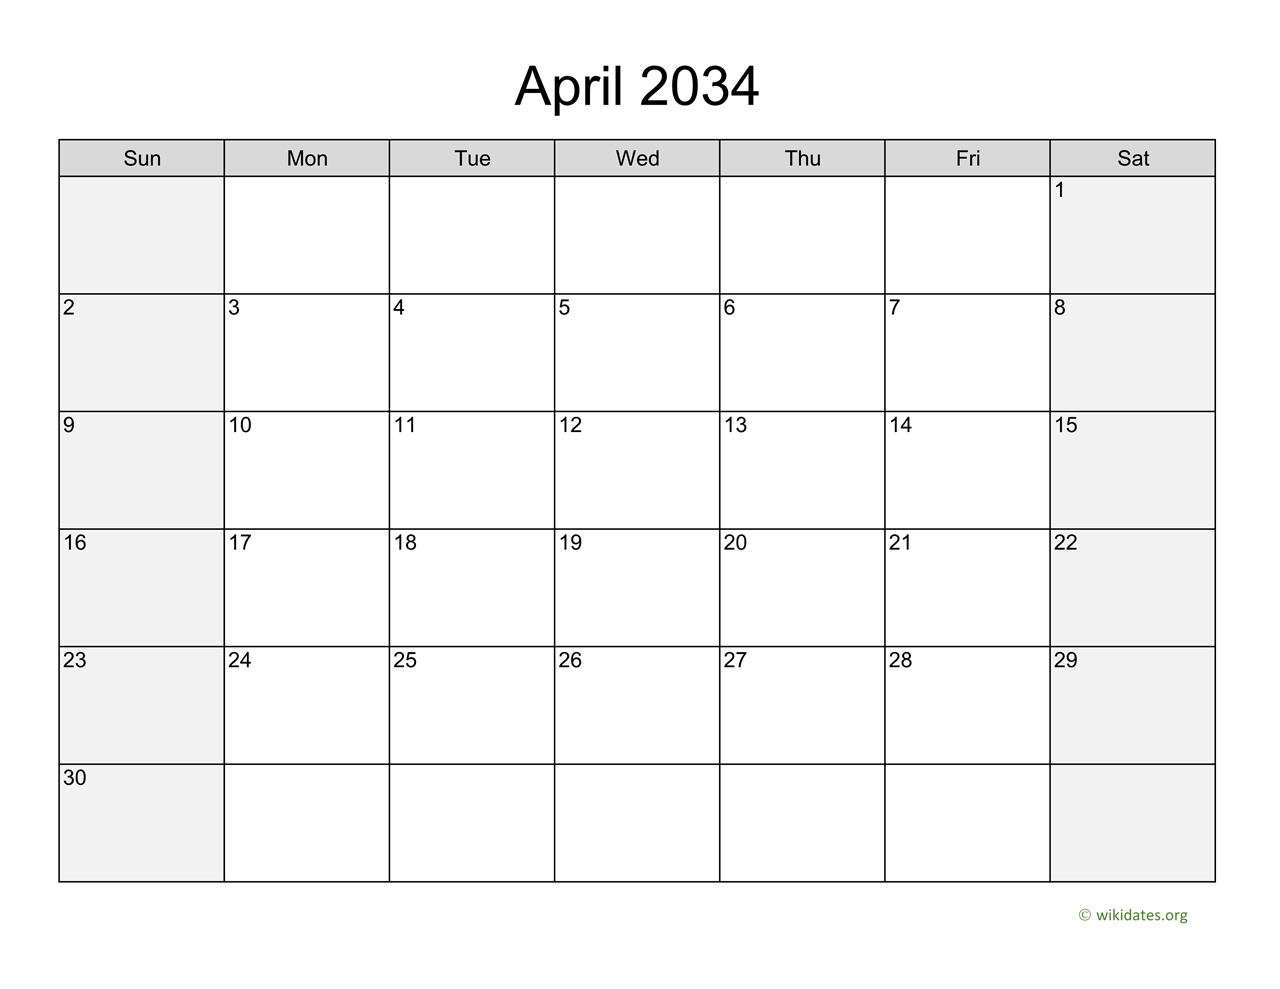 April 2034 Calendar with Weekend Shaded | WikiDates.org